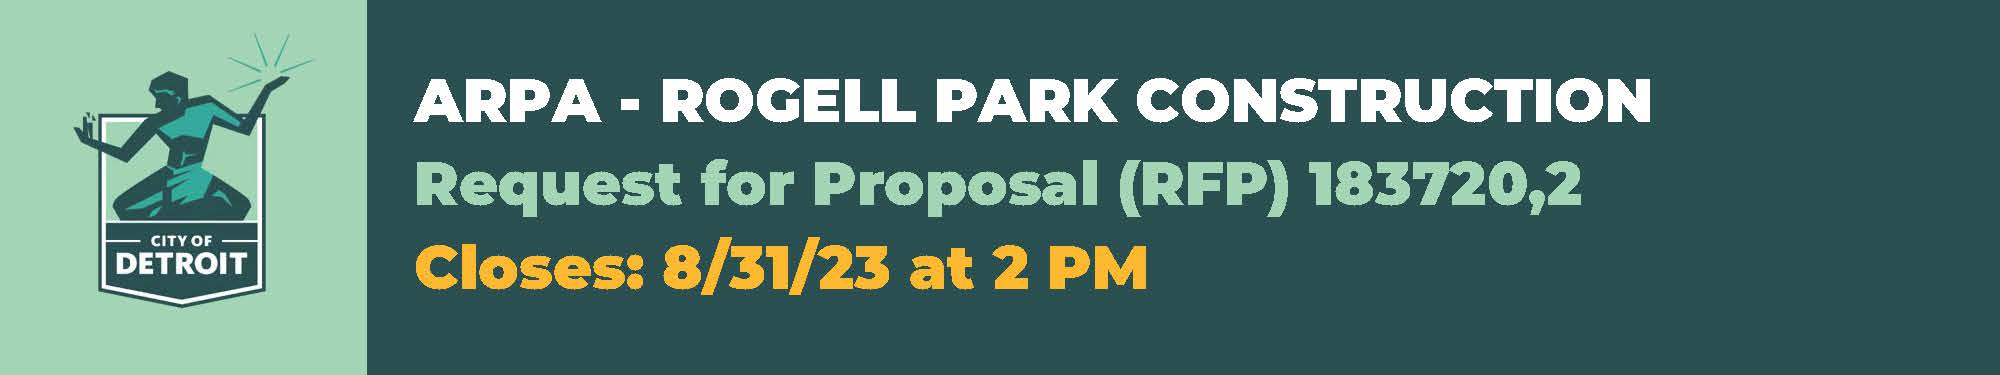 Take Part: ARPA - ROGELL PARK CONSTRUCTION